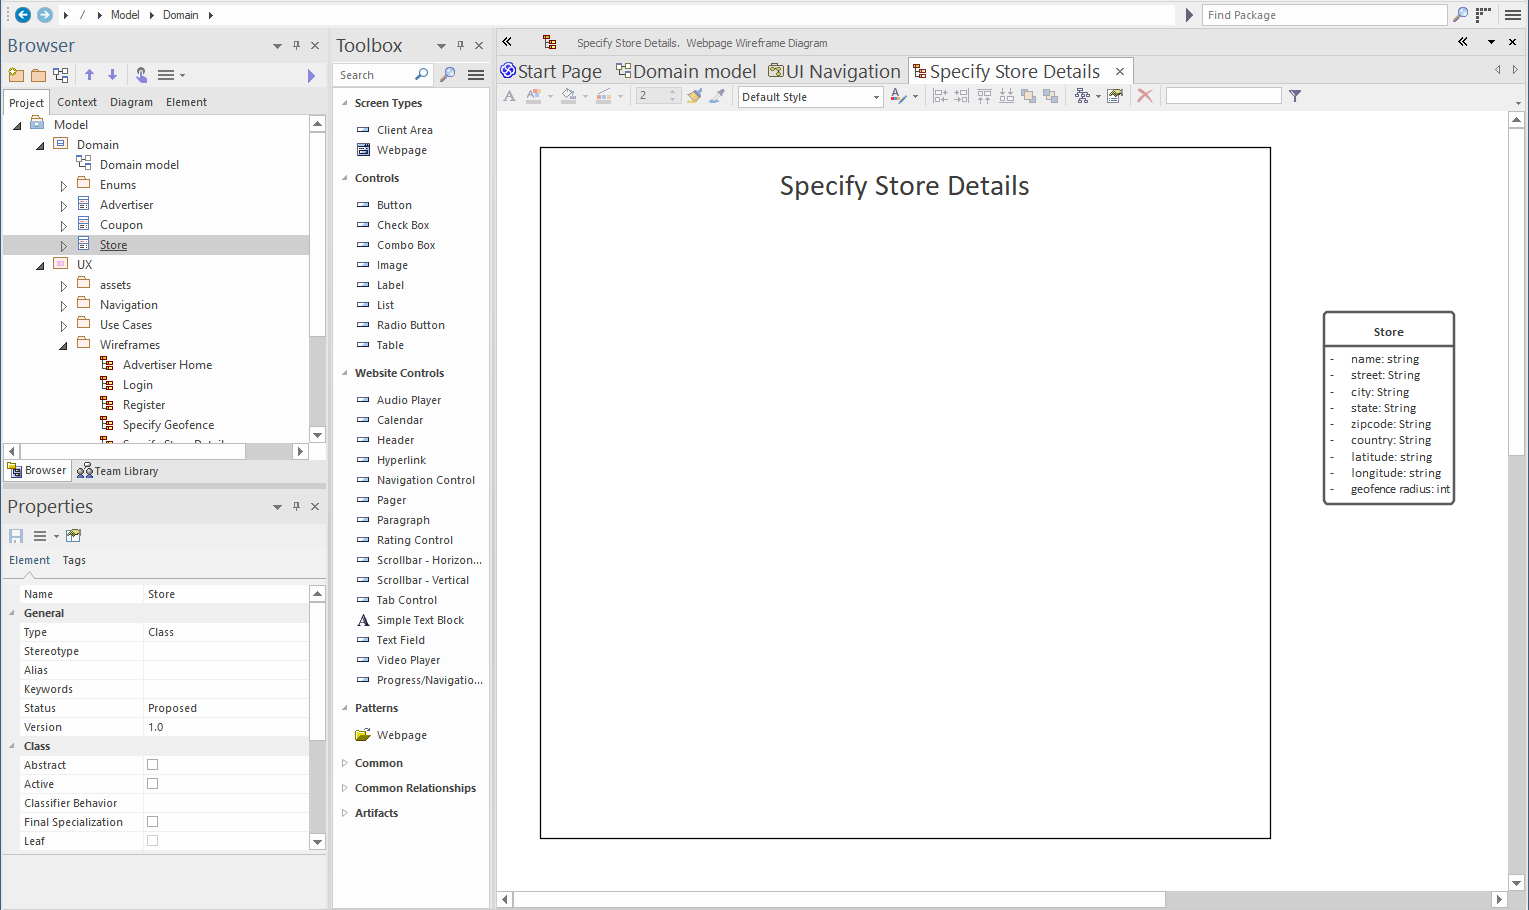 Specify Store Details empty-ish page